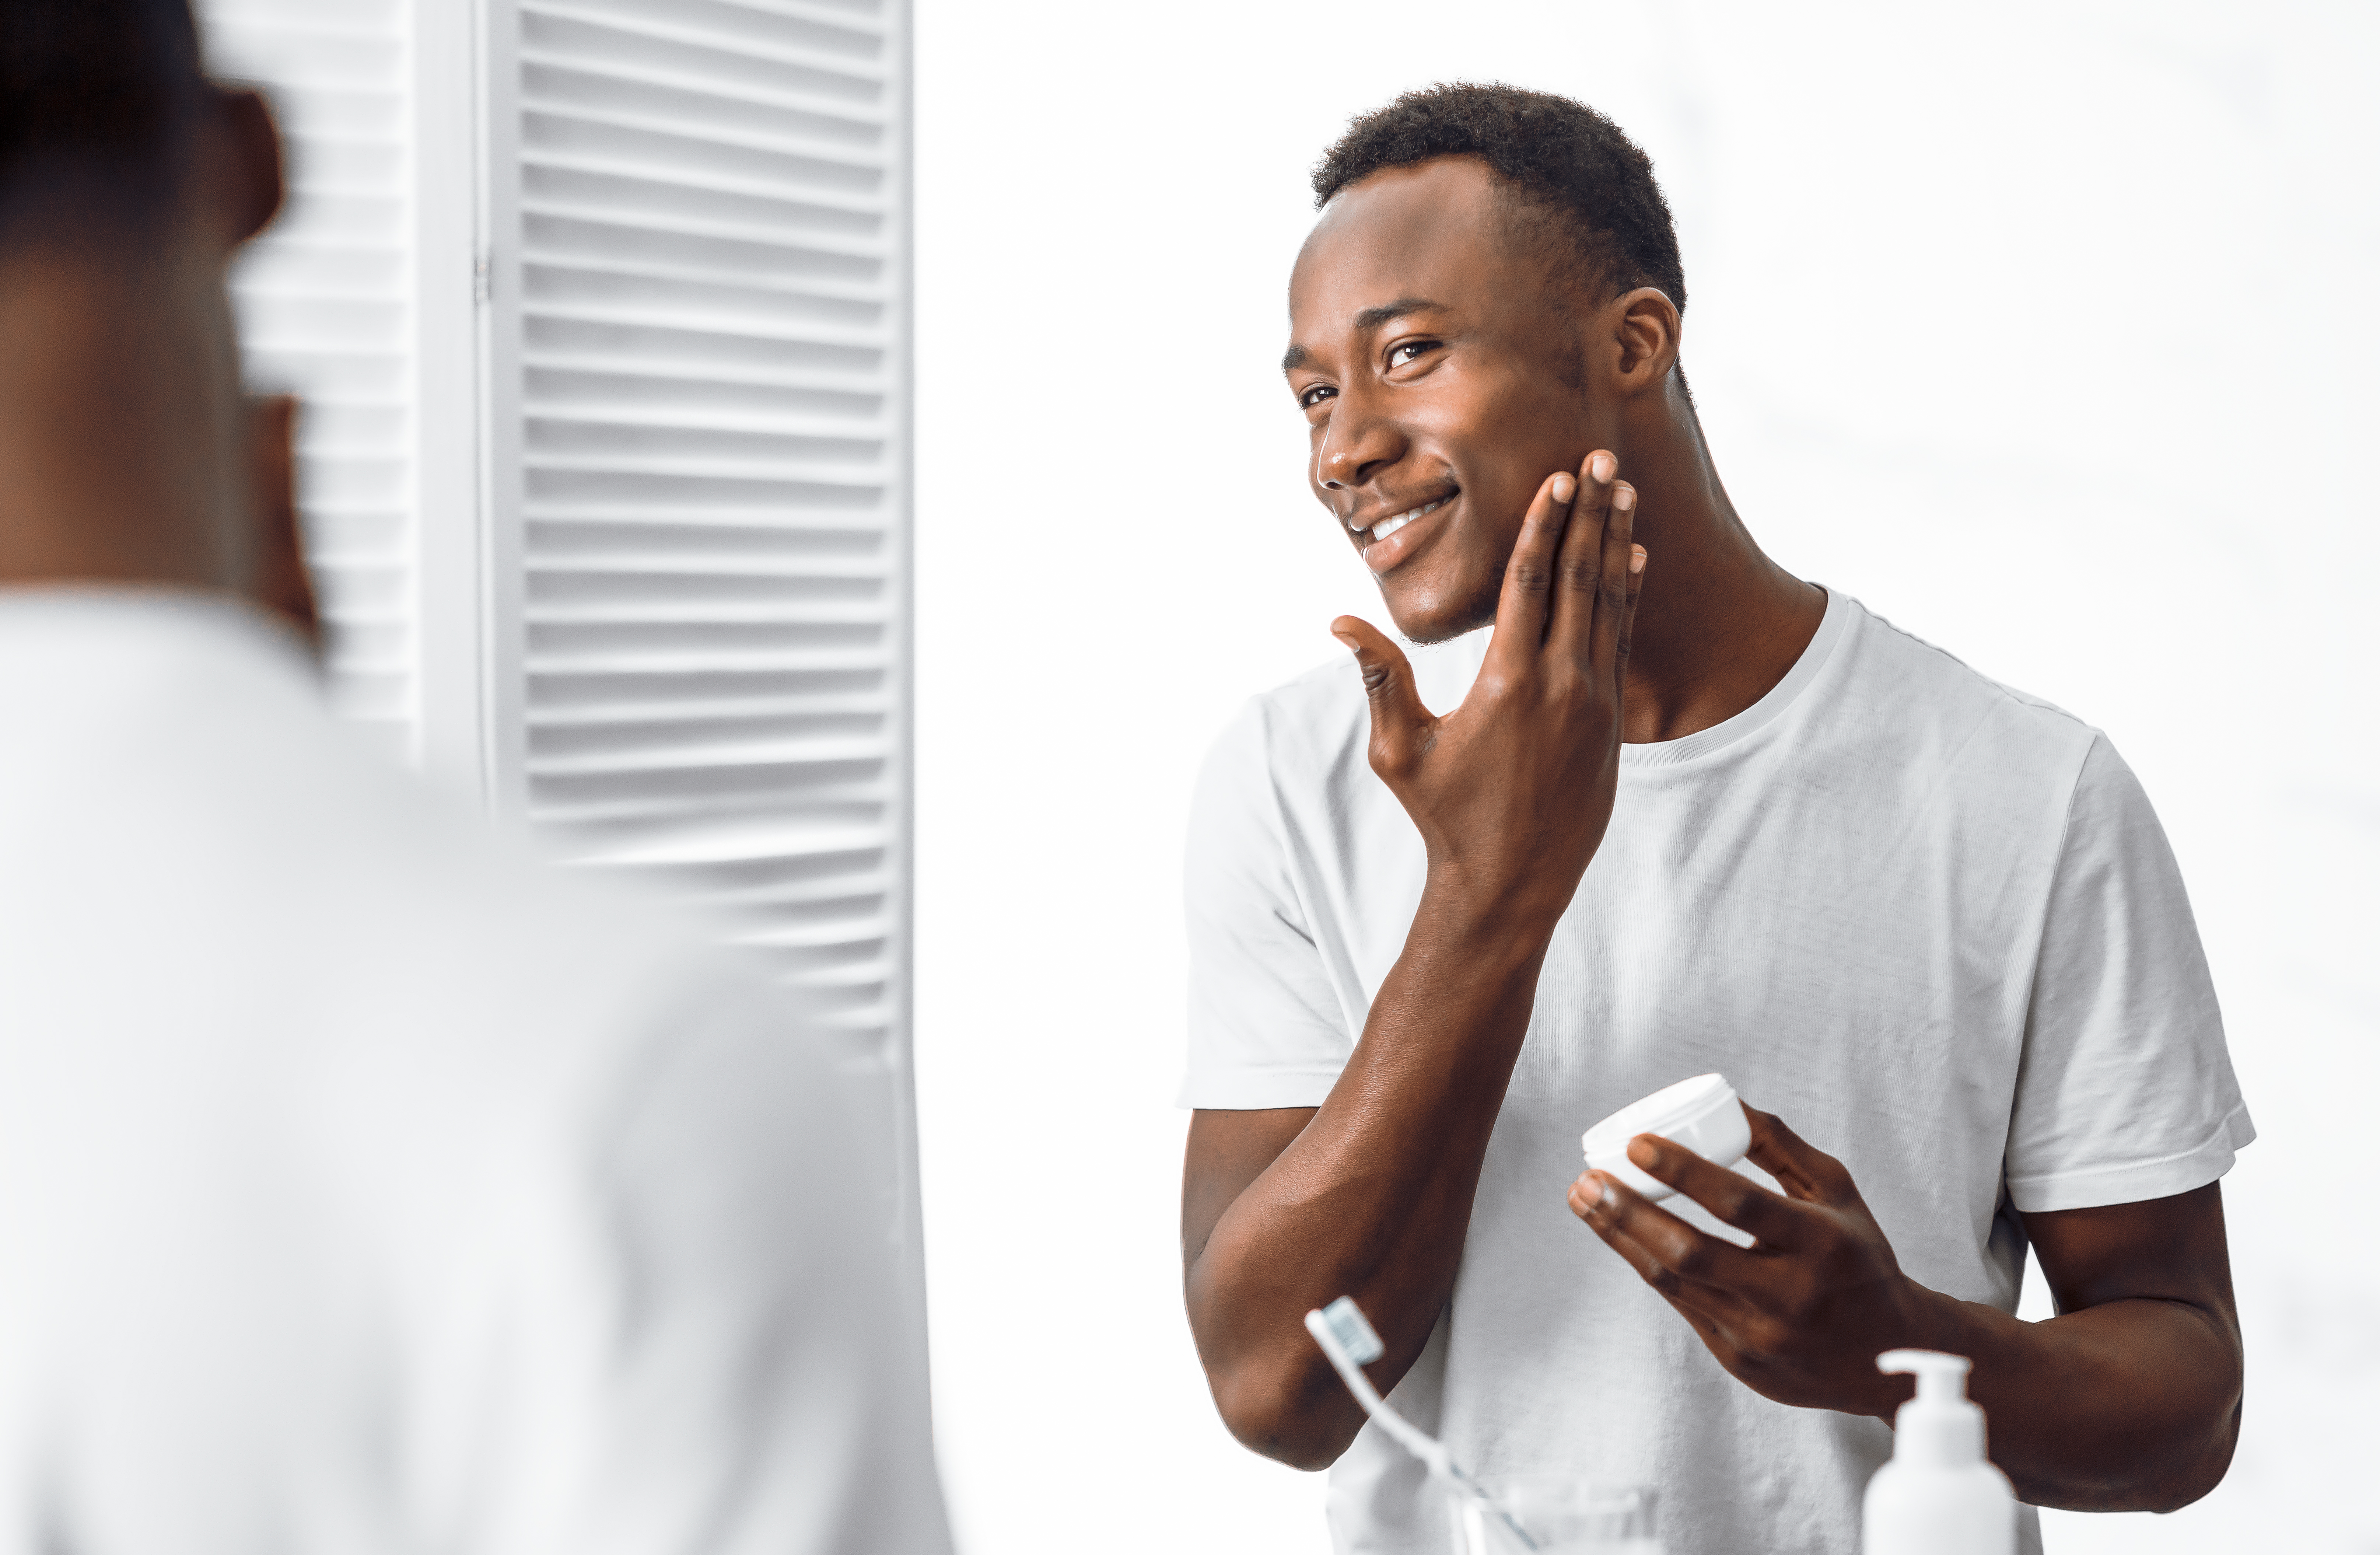 The Growing Demand for Men's Personal Care Products